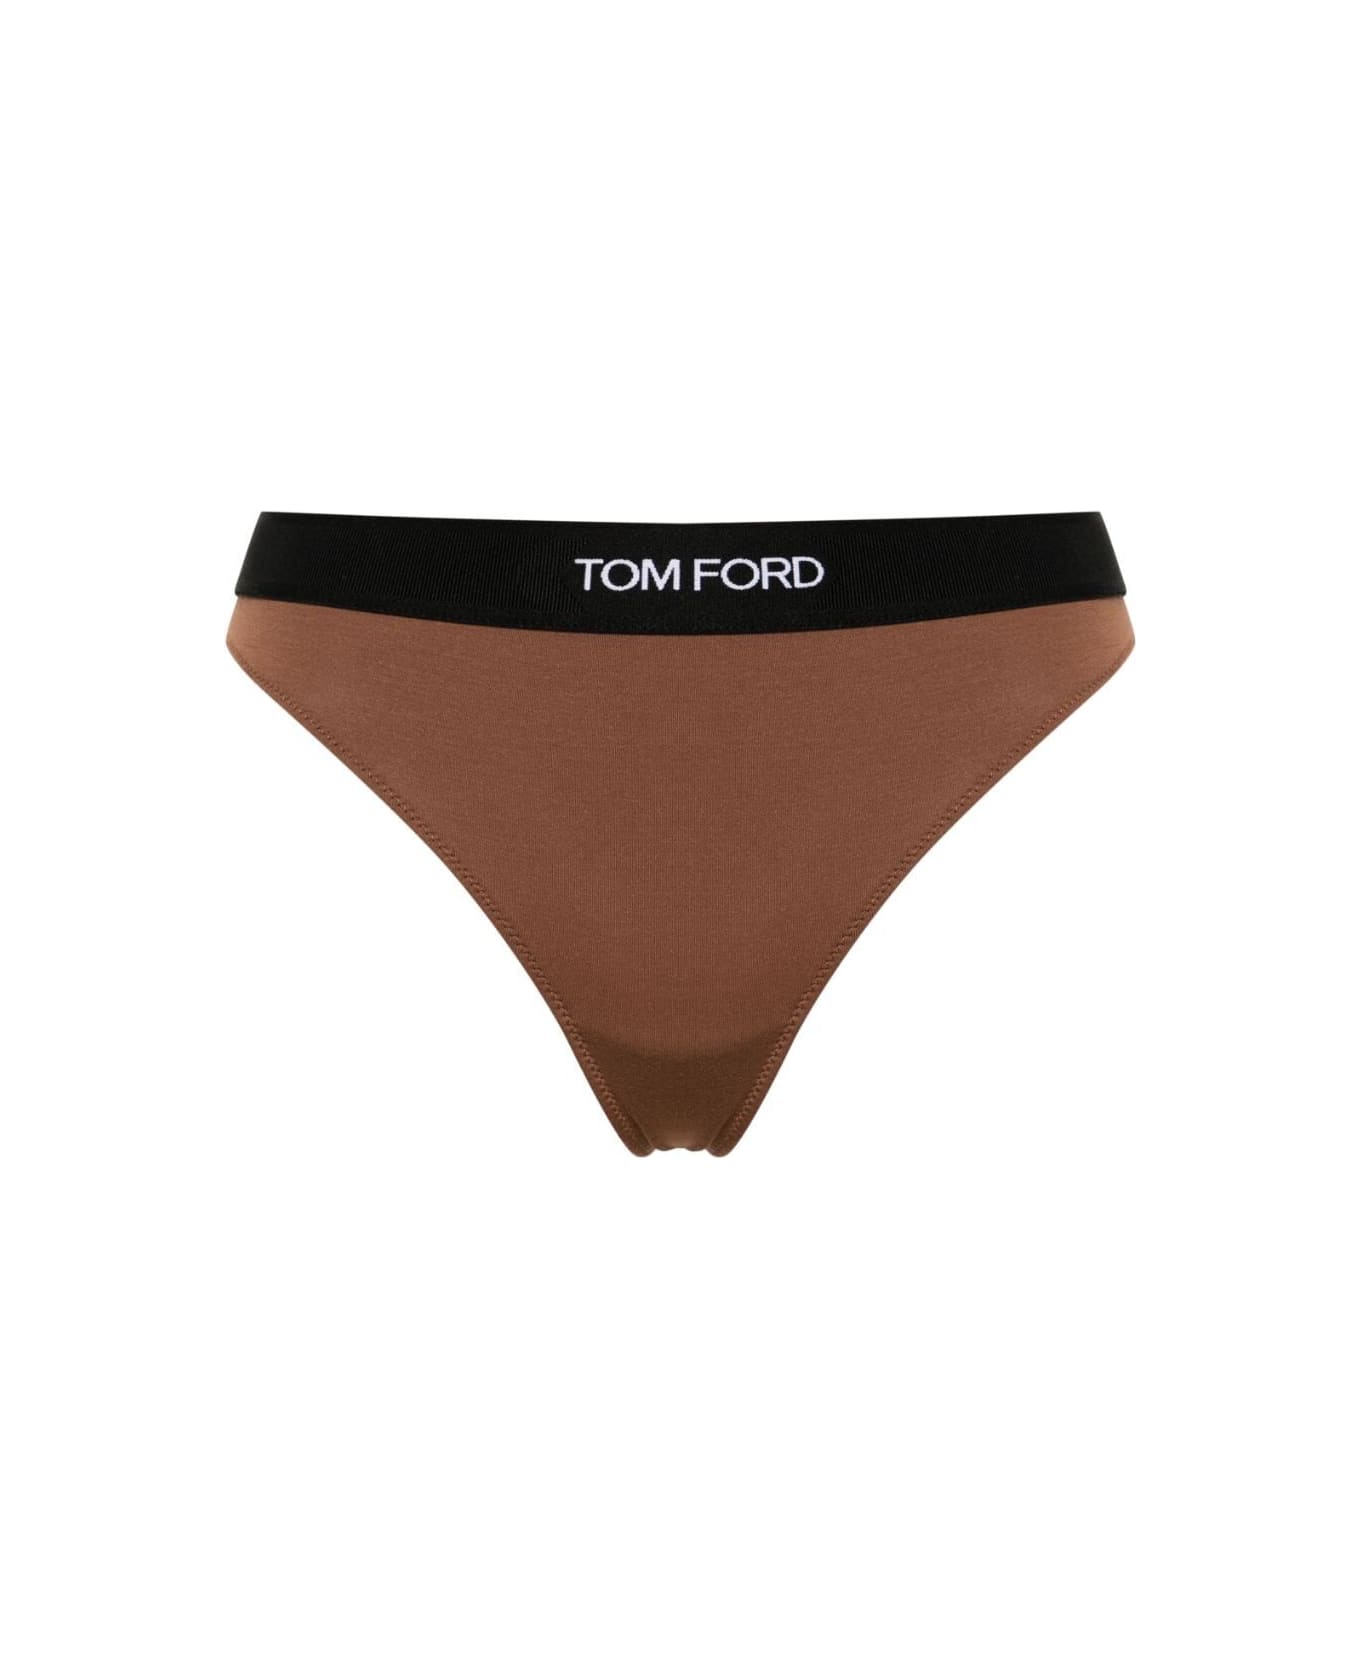 Tom Ford Modal Signature Thong - Cocoa Brown ショーツ